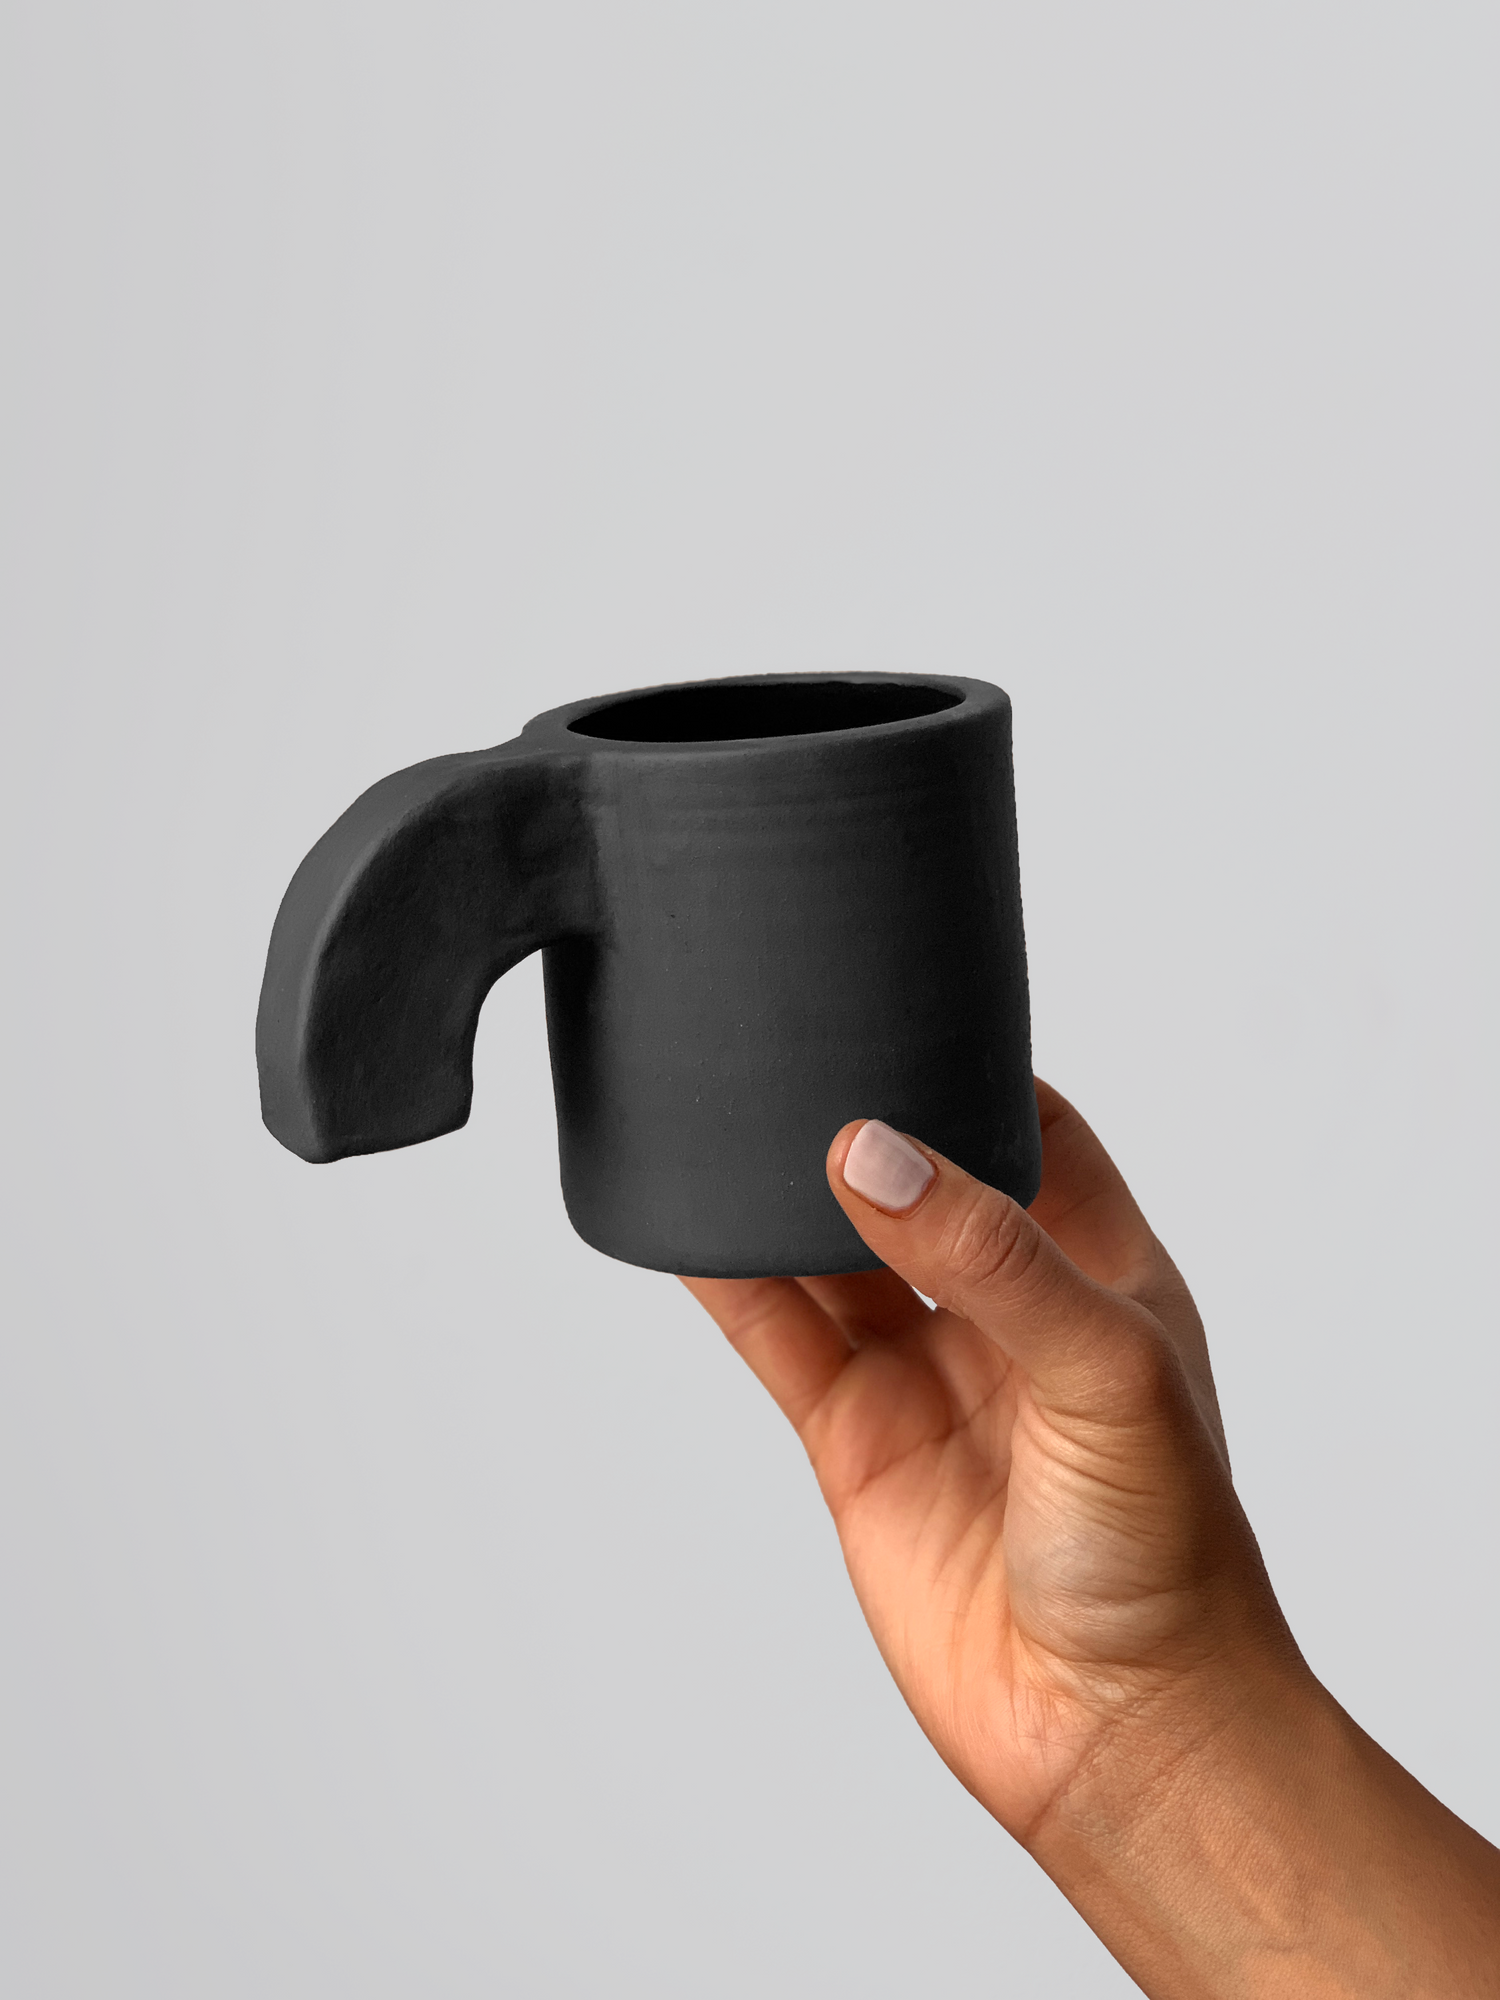 Black matte stoneware ceramic mug with a thick downward facing curved handle.